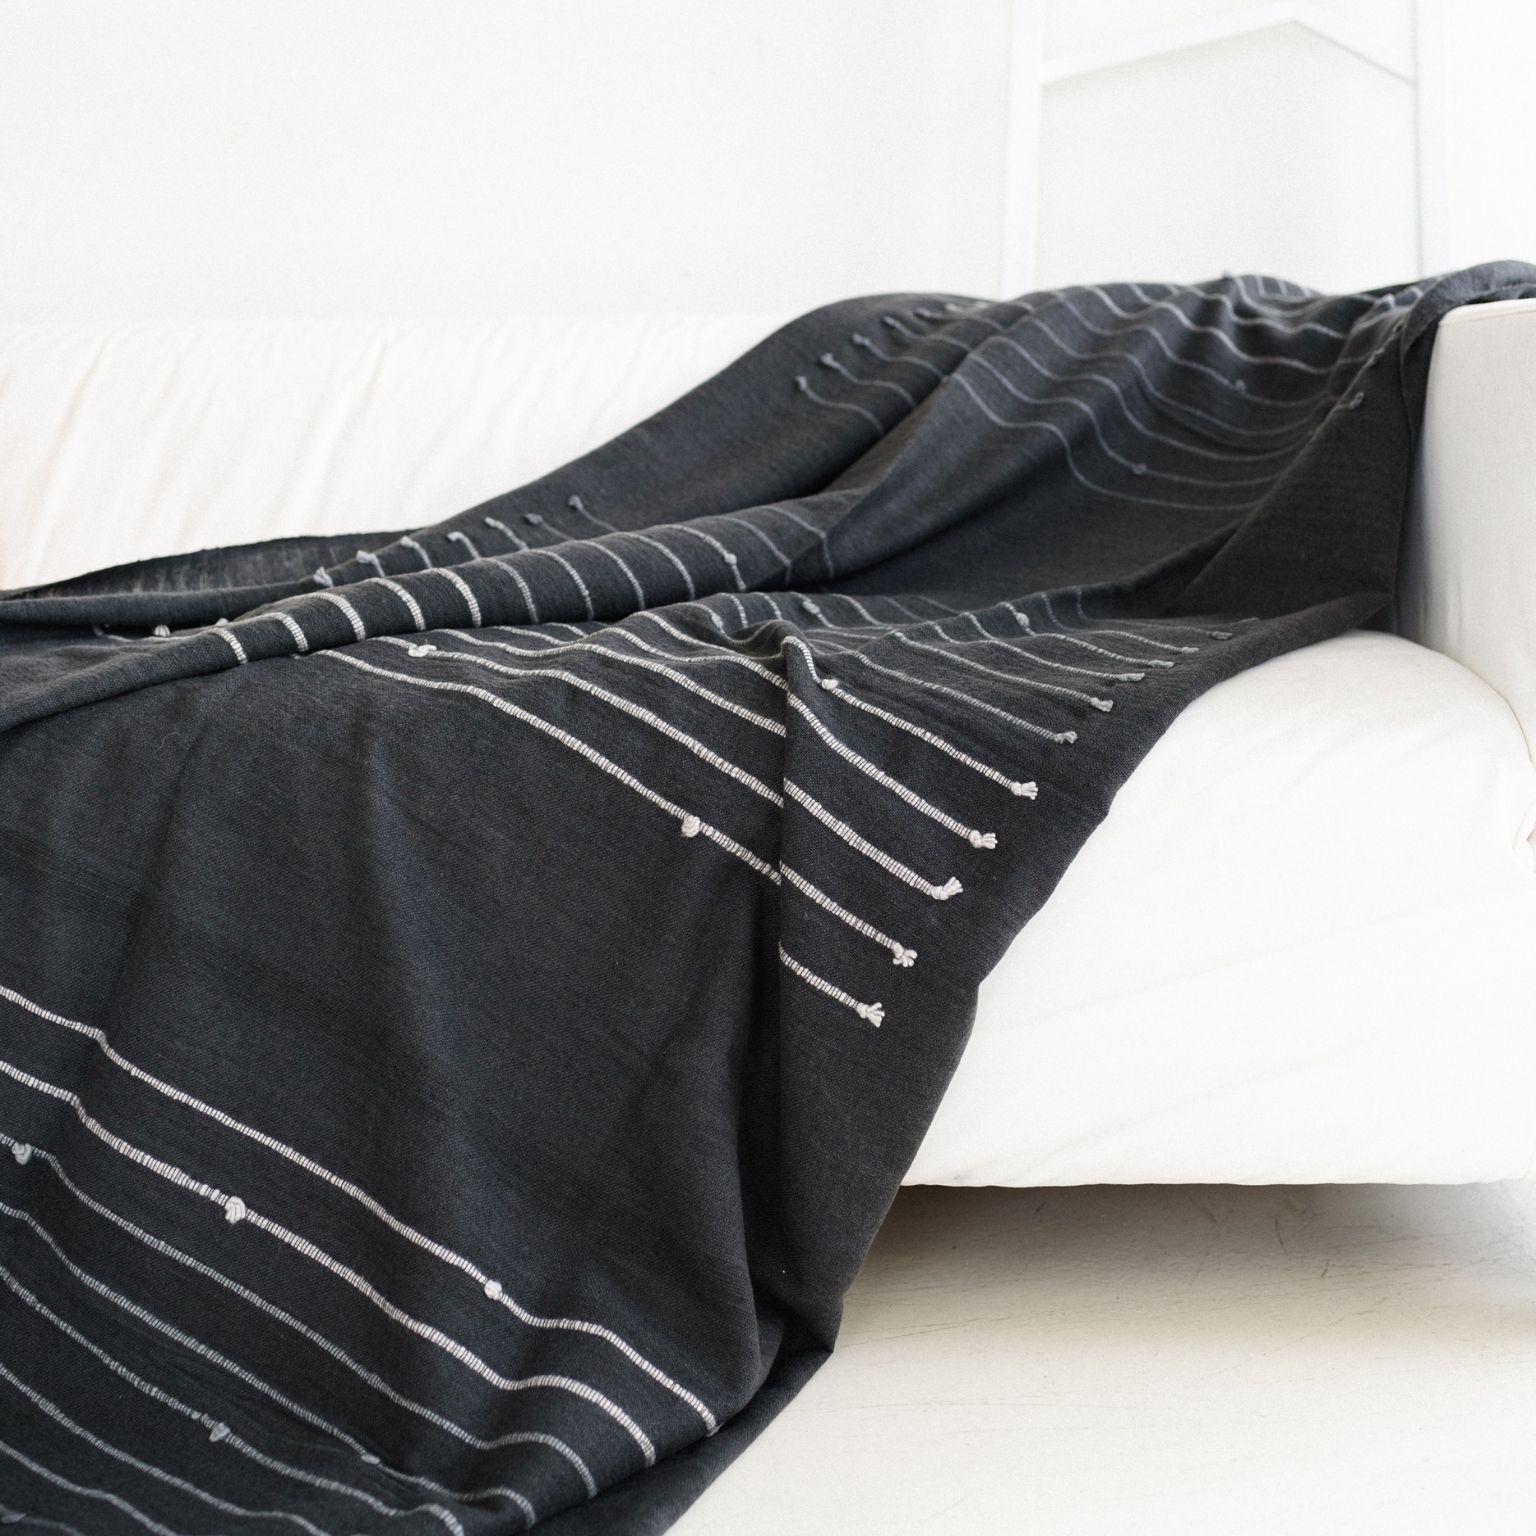 Contemporary  Alei Handloom Throw / Blanket In Charcoal Black , Stripes Pattern  For Sale